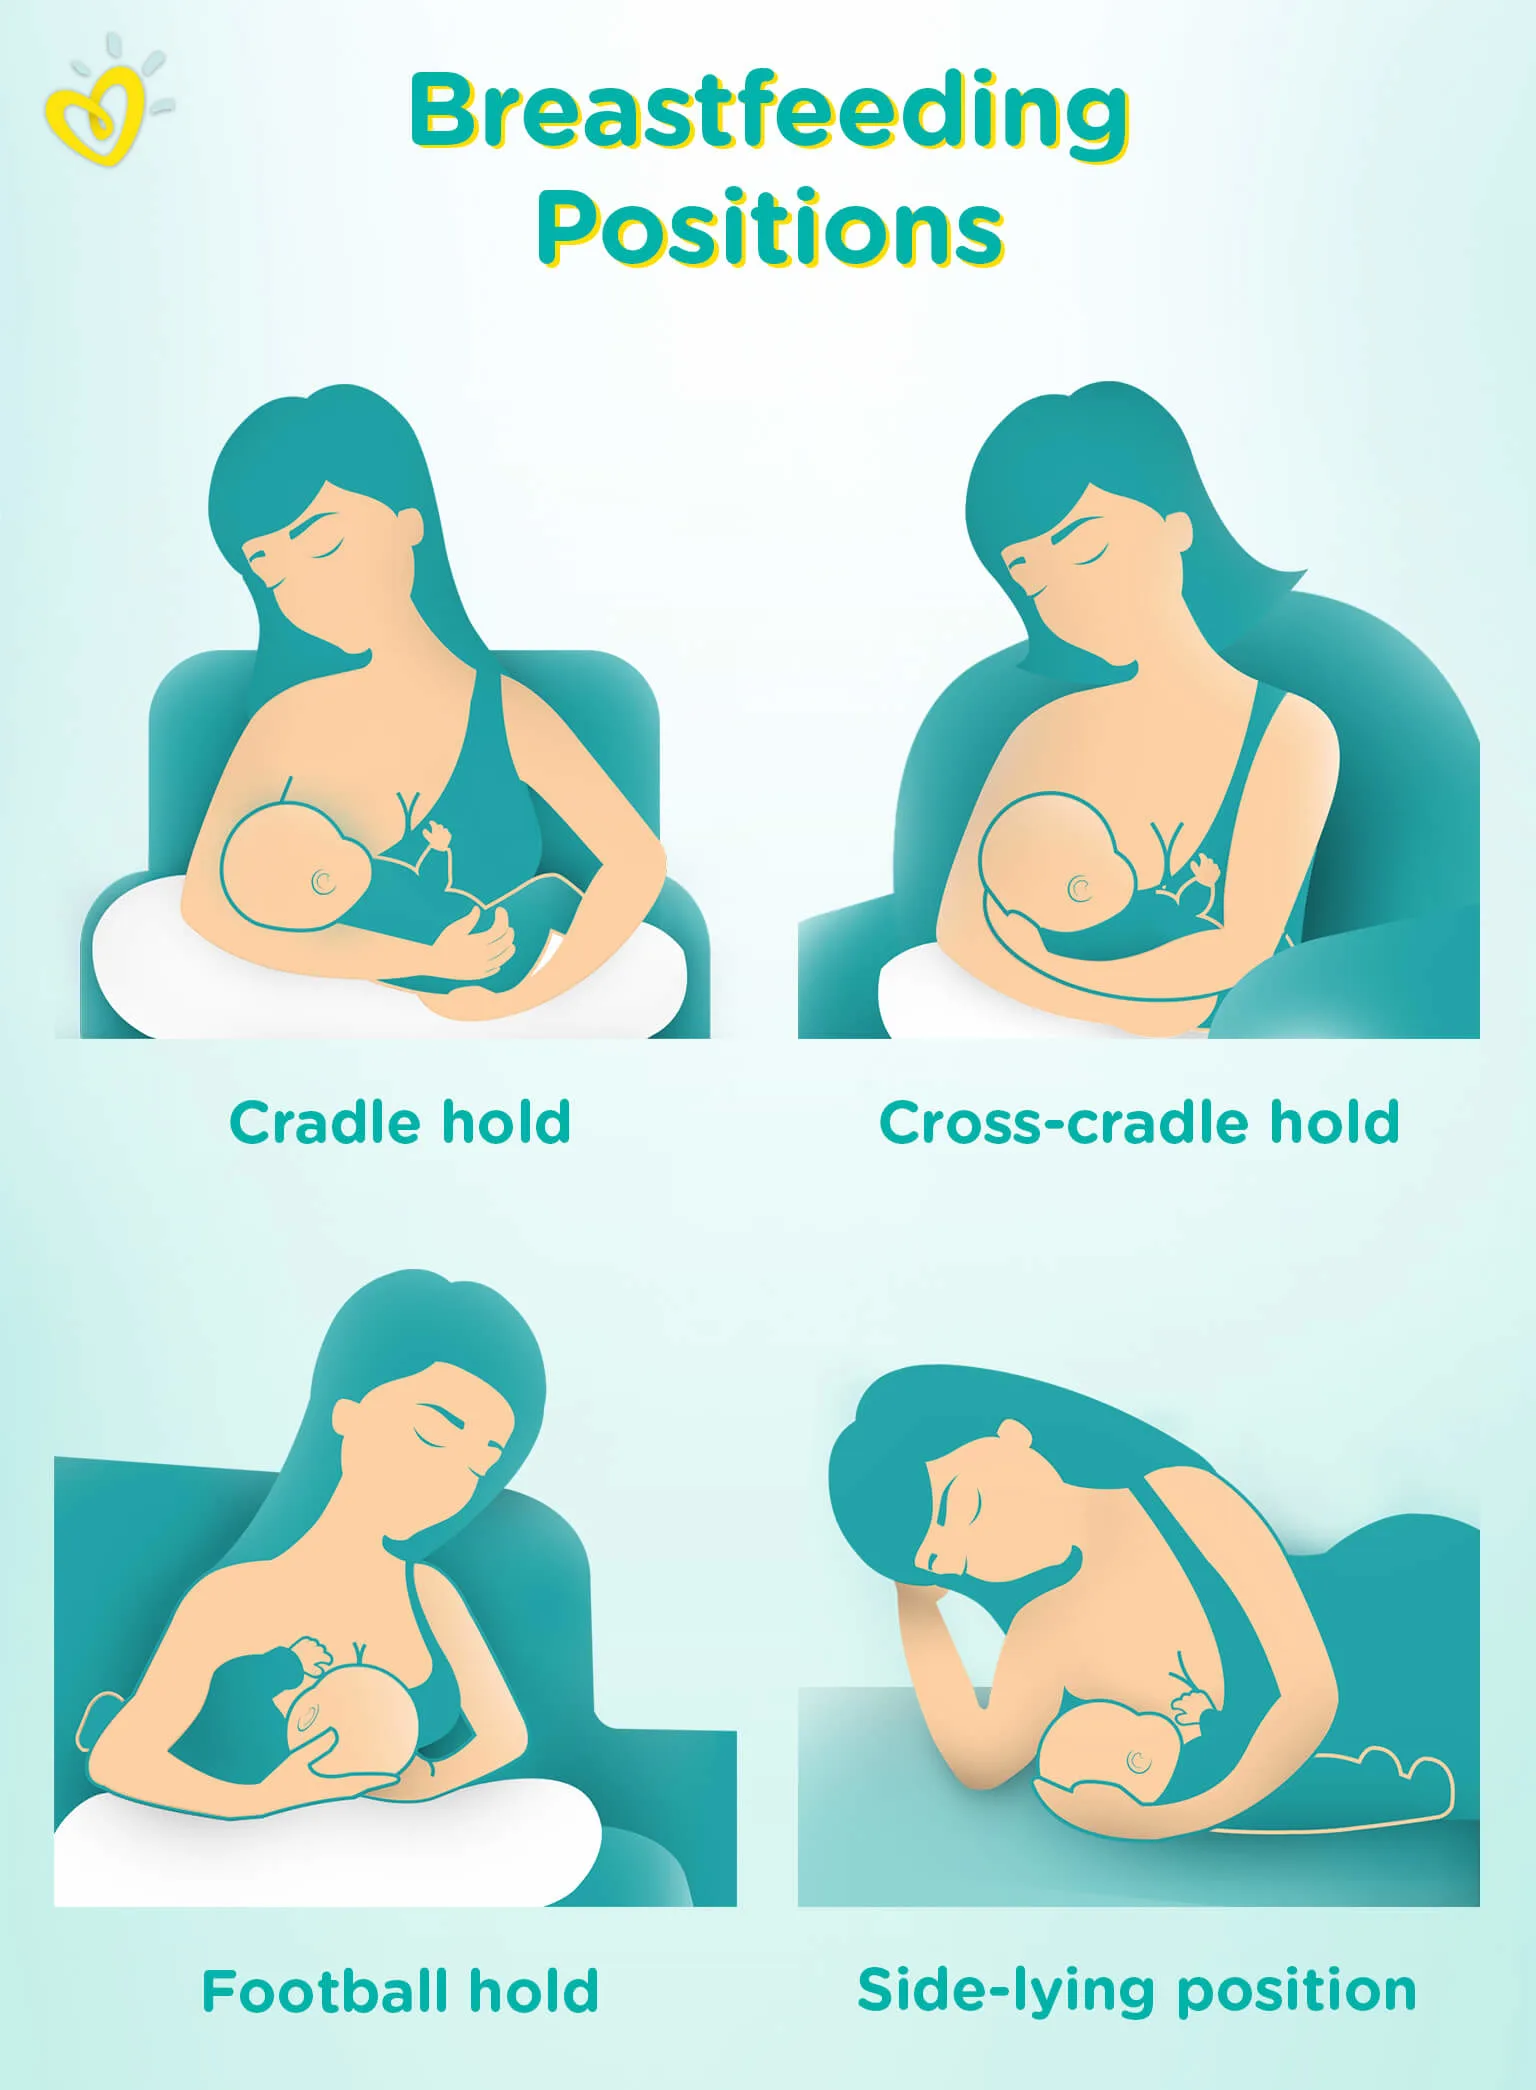 Tips for Breastfeeding with Larger Breasts